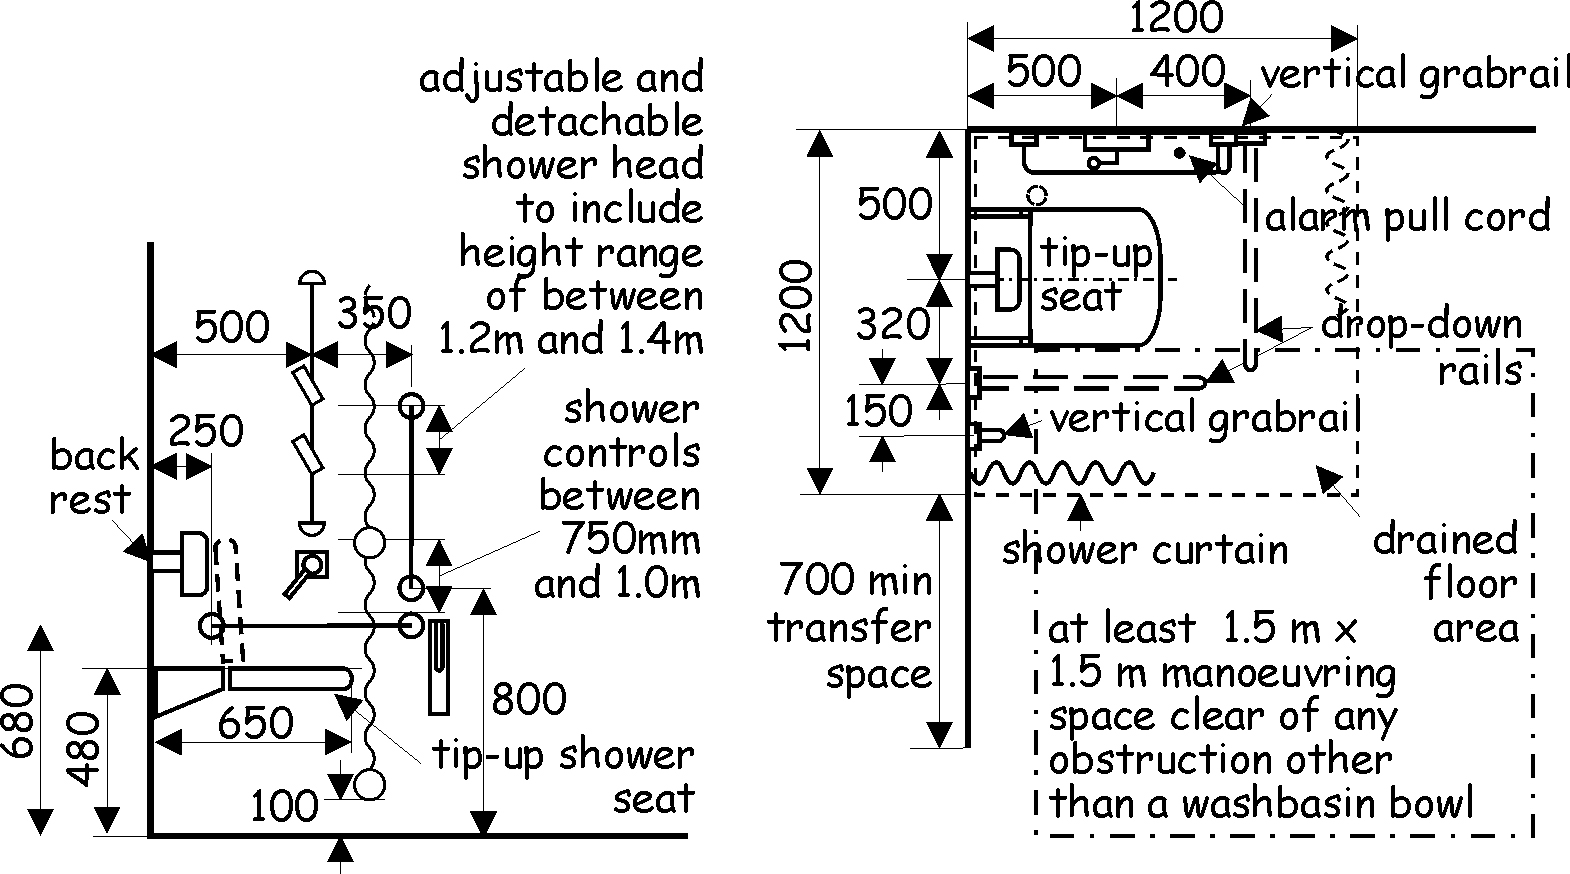 Provisions within an accessible shower room